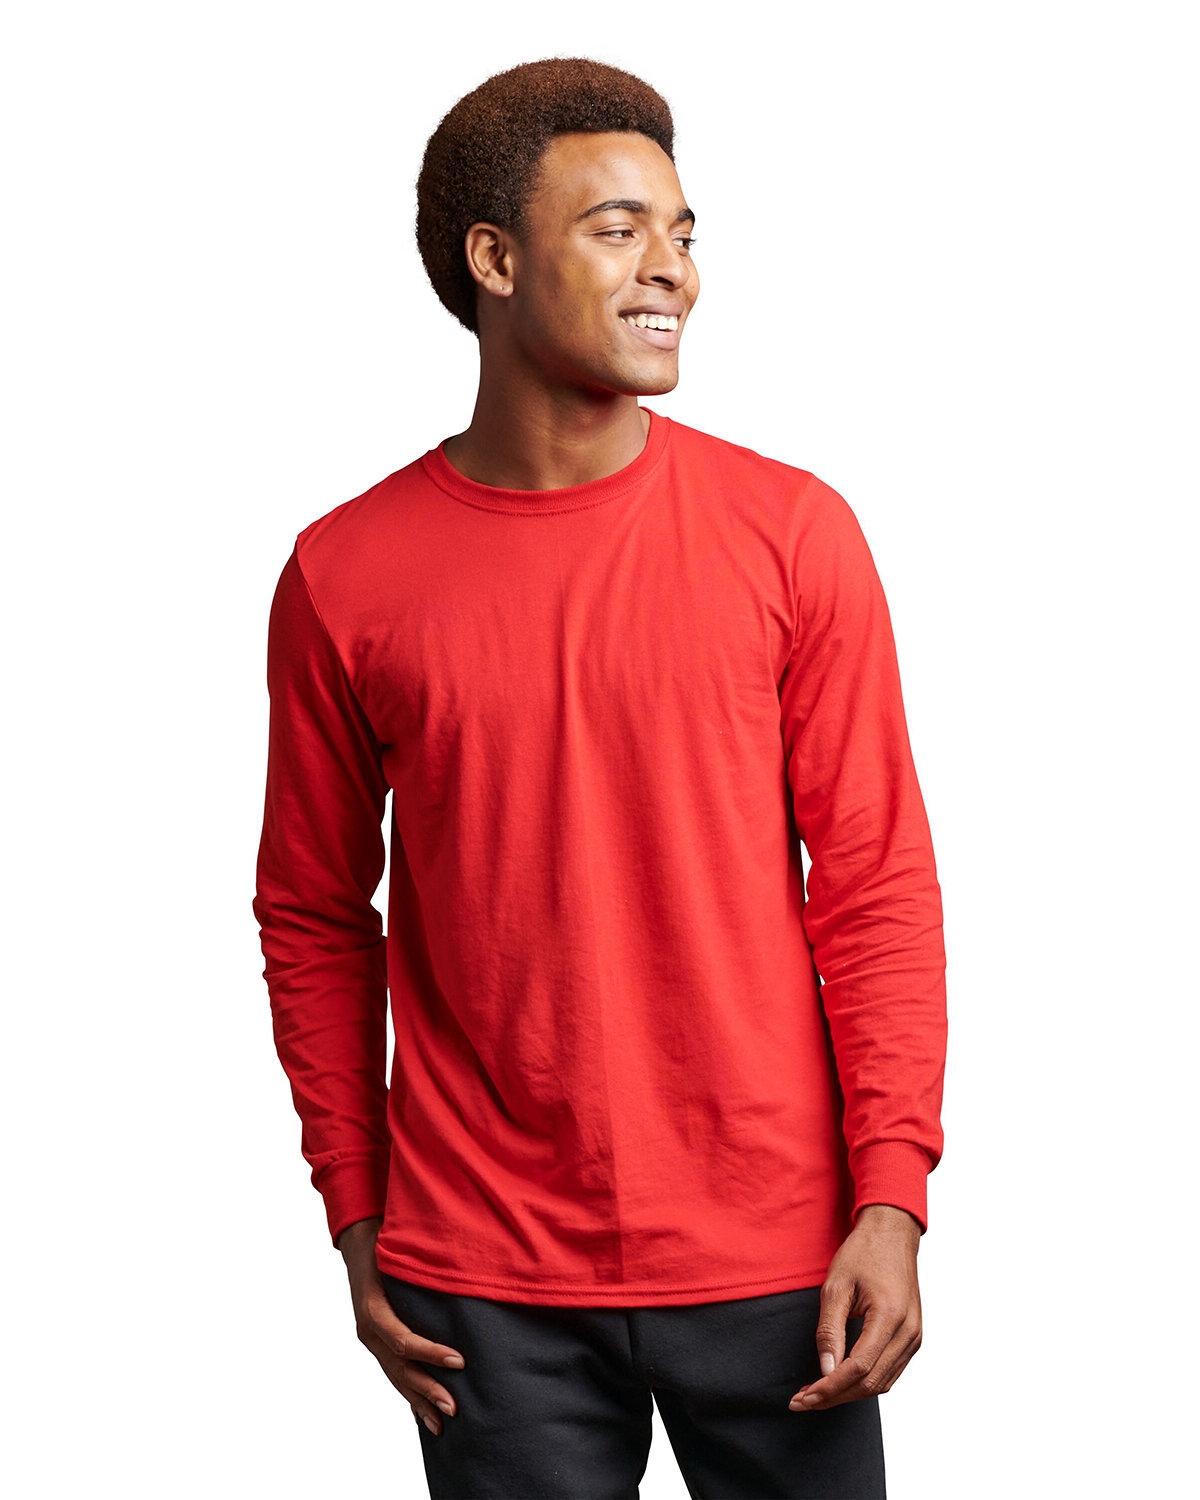 Russell Athletic Unisex Cotton Classic Long-Sleeve T-Shirt TRUE RED 